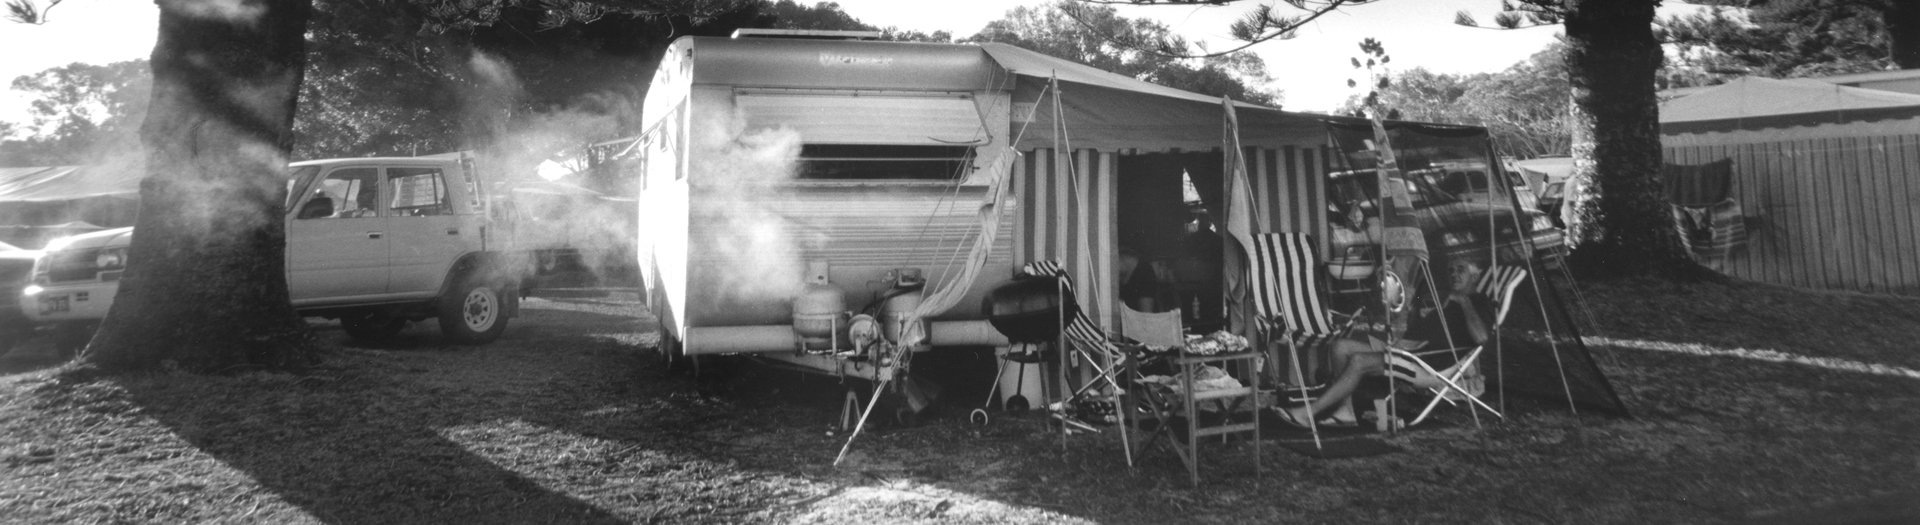 A black and white image of a caravan with an awning and some camp chairs, one occupied by an older man